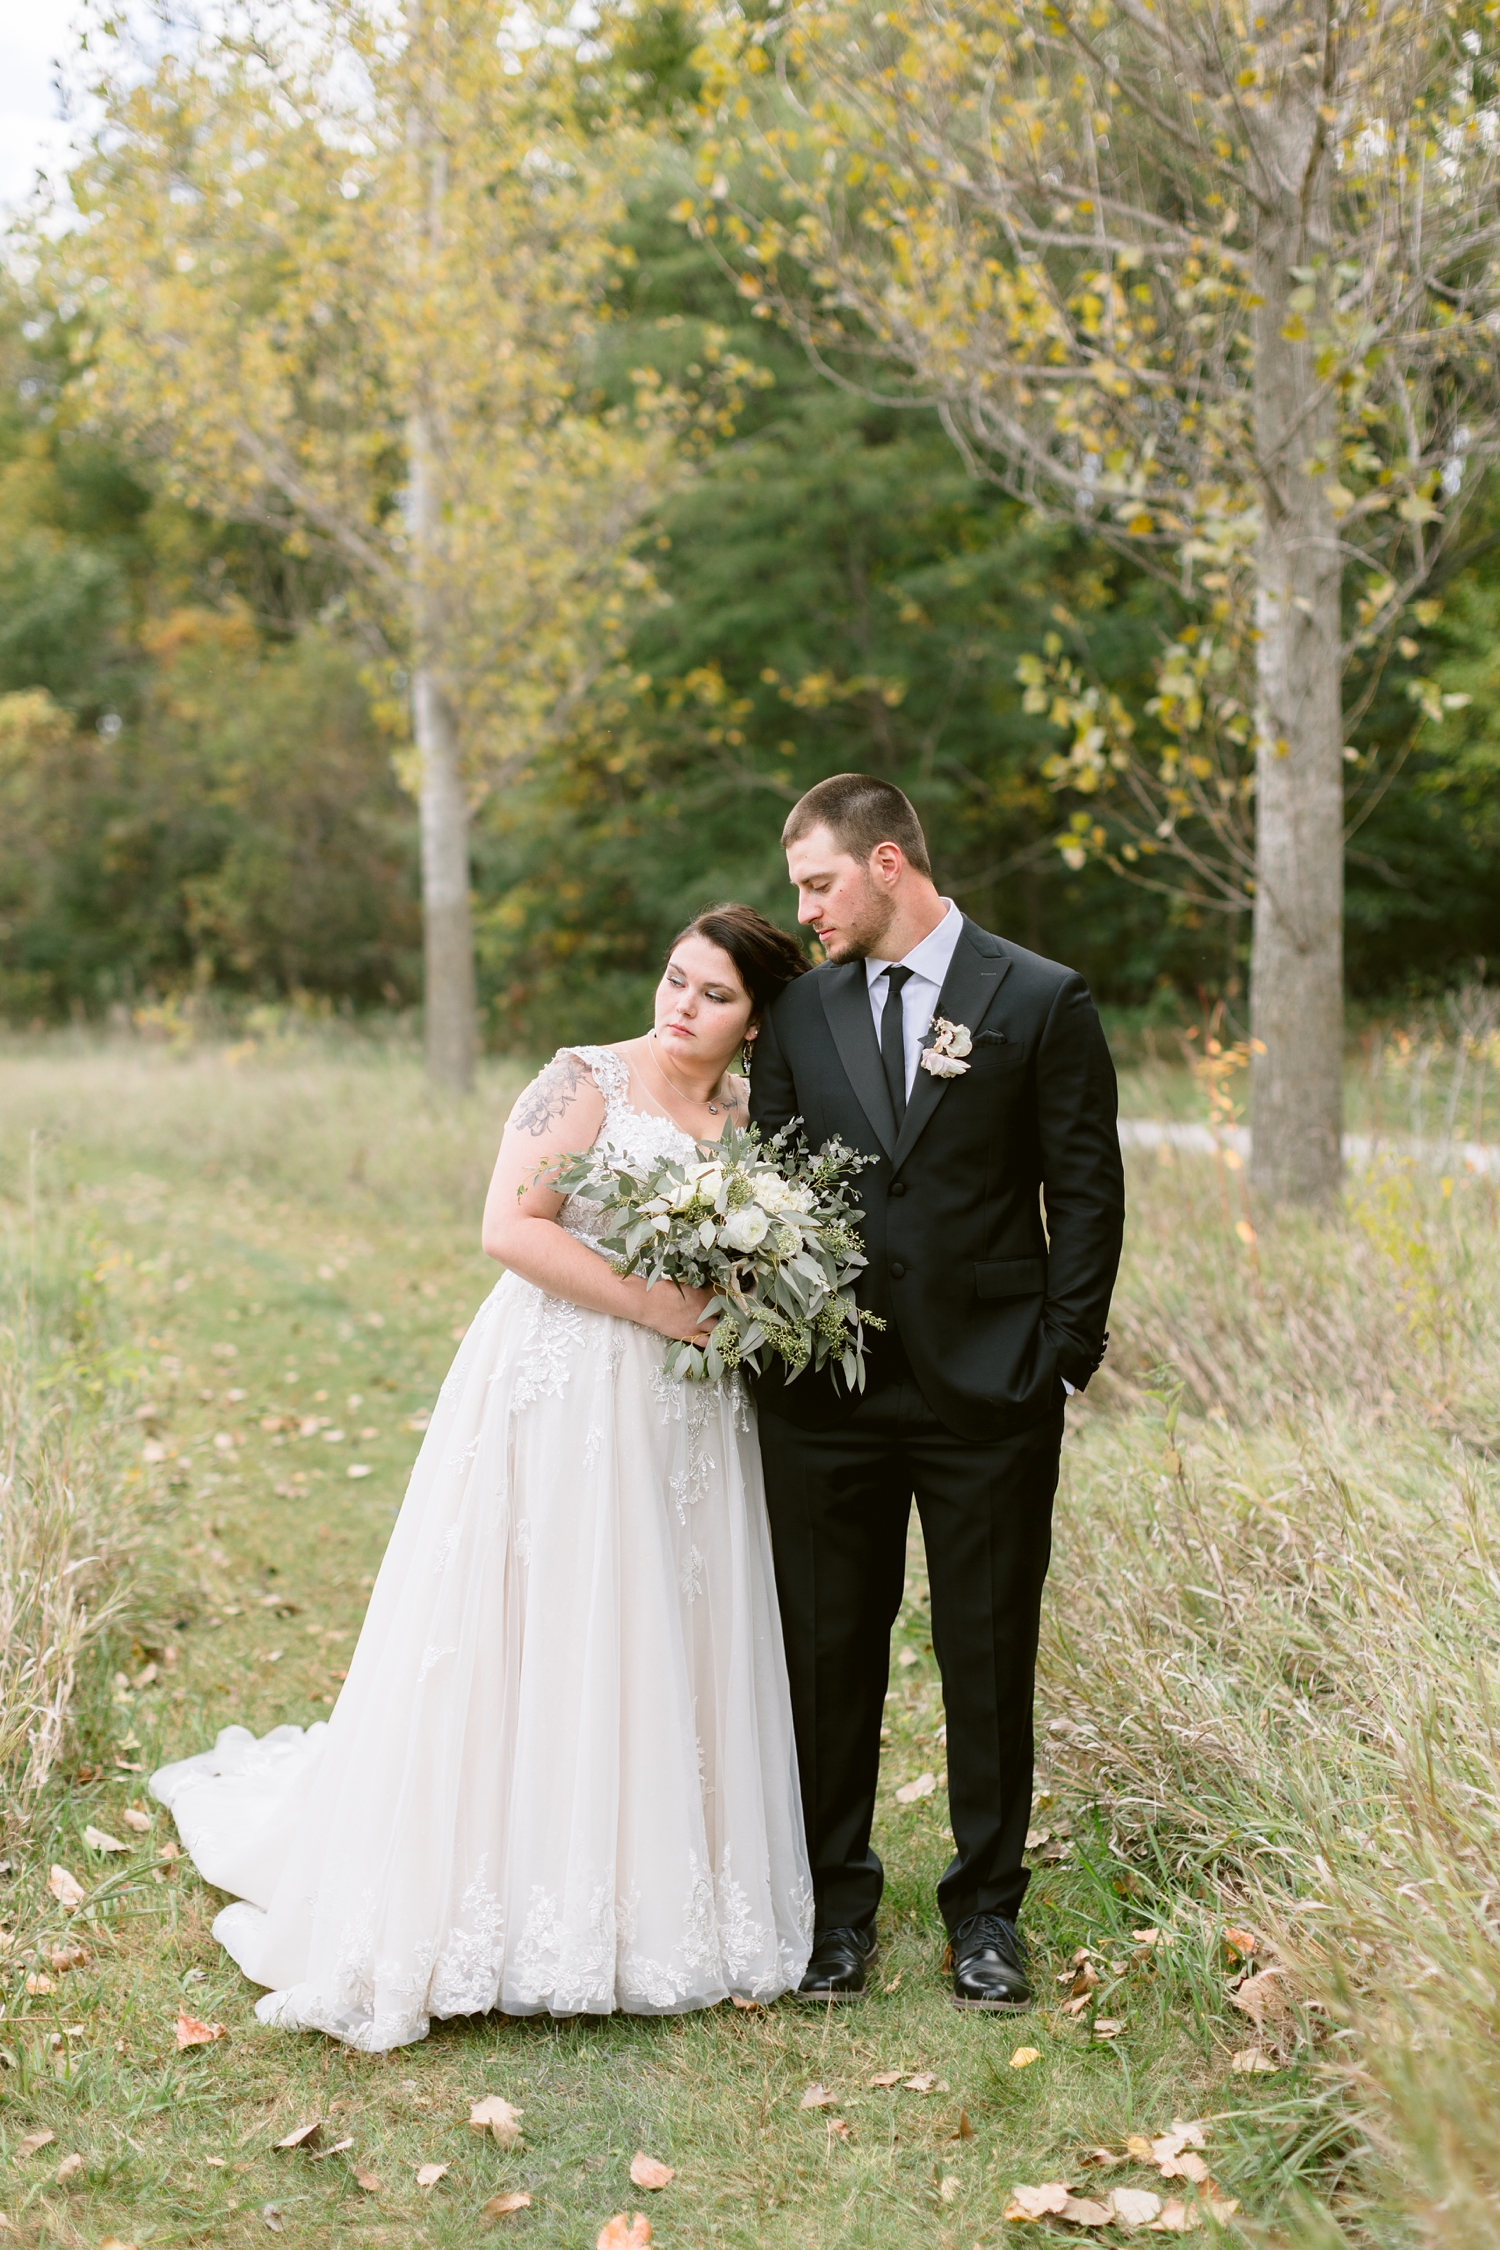 Mary leans her head on her new husband's shoulder as they stand surrounded by beautiful fall foliage at Sheldon Park, Humboldt, IA | CB Studio